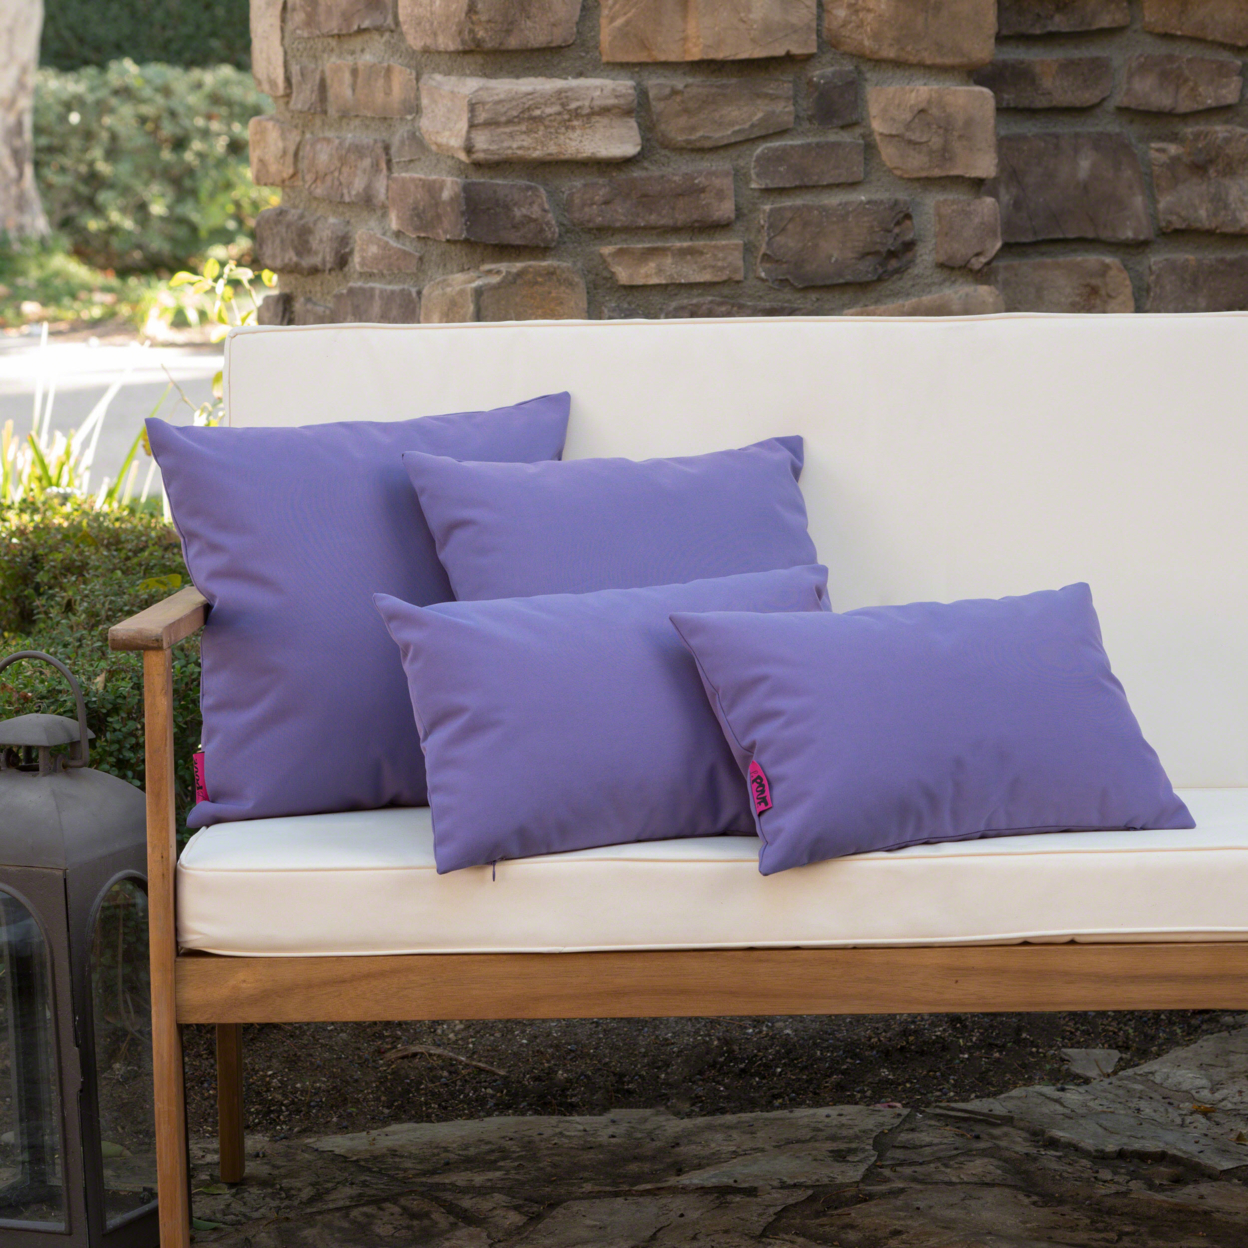 Coronado Outdoor Water Resistant Square And Rectangular Throw Pillows (Set Of 4) - Coral